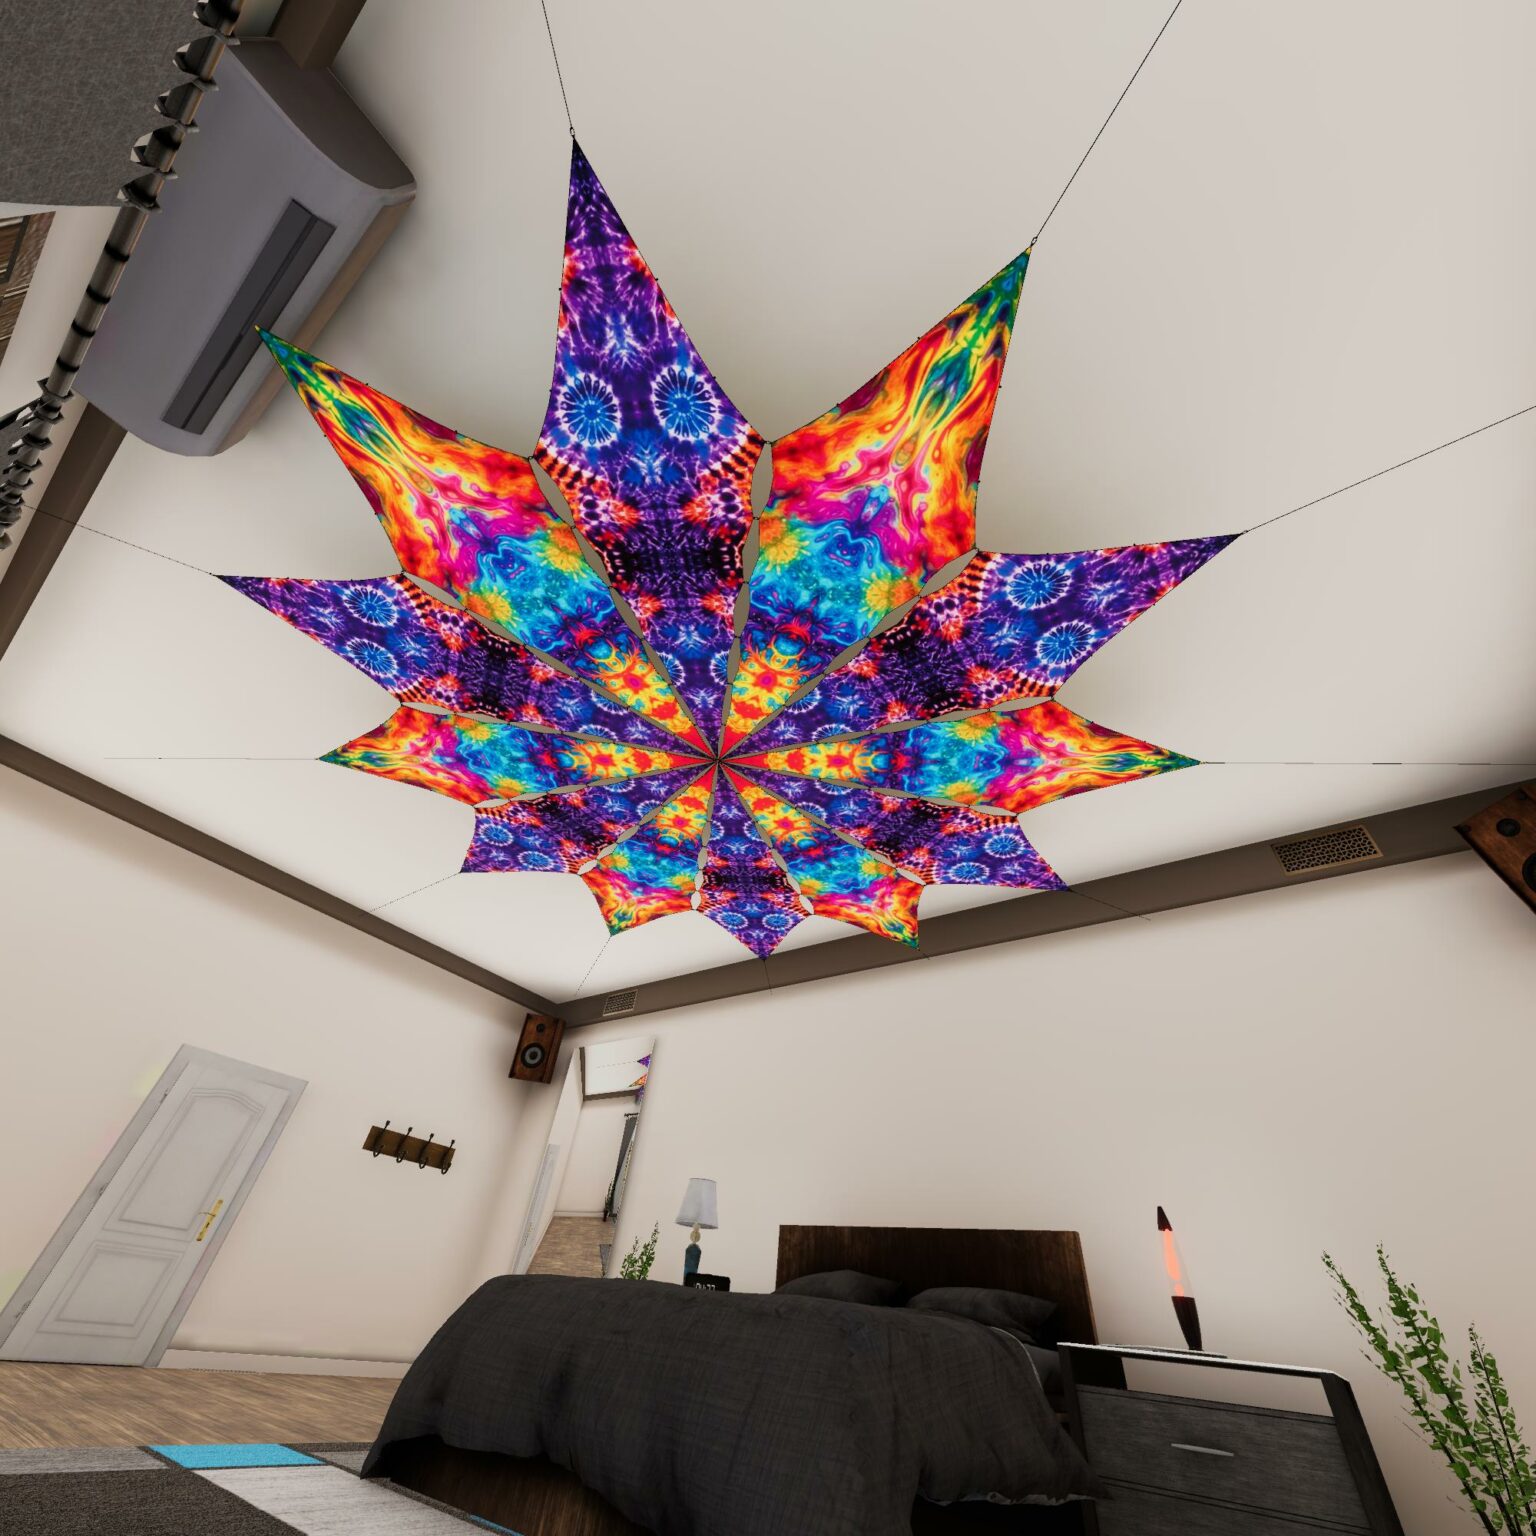 TD-PT02 and TD-PT03 - Tie-Dye Style Ceiling Decoration - 12 petals set - 3D-Preview Bedroom - Daylight